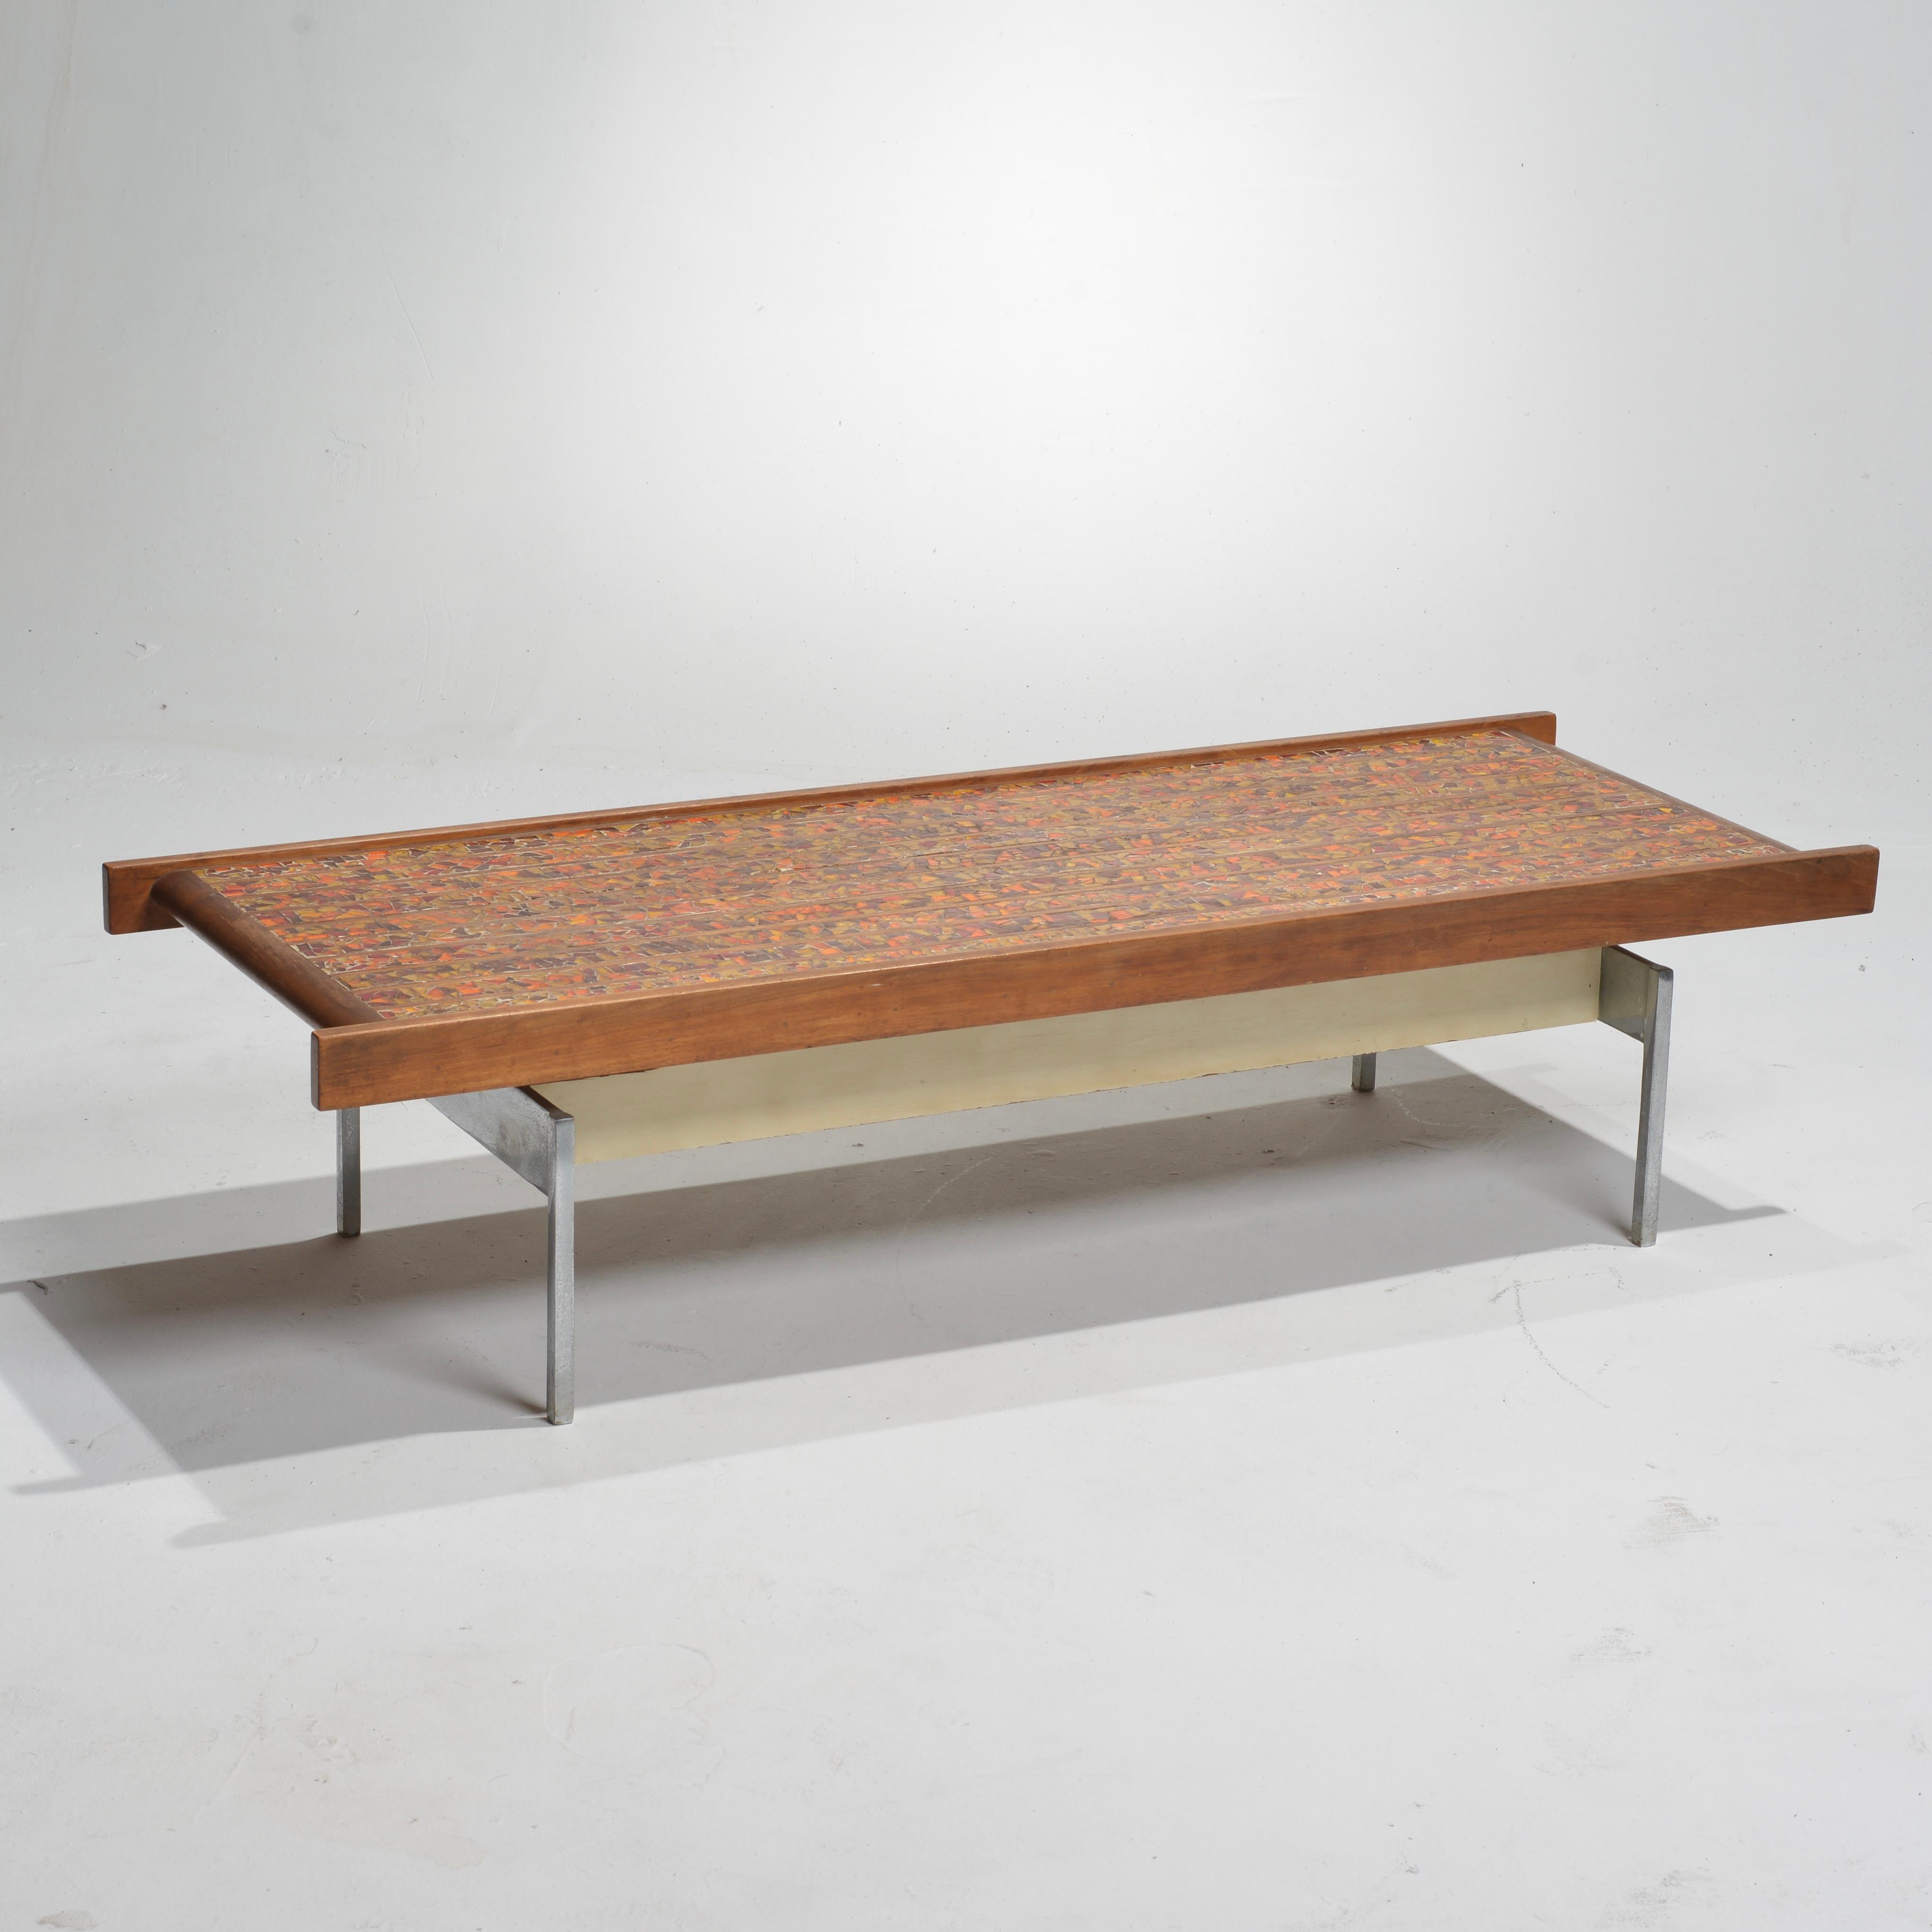 Modernist Tile, Wood and Chrome Rectangular Coffee Table In Good Condition For Sale In Los Angeles, CA